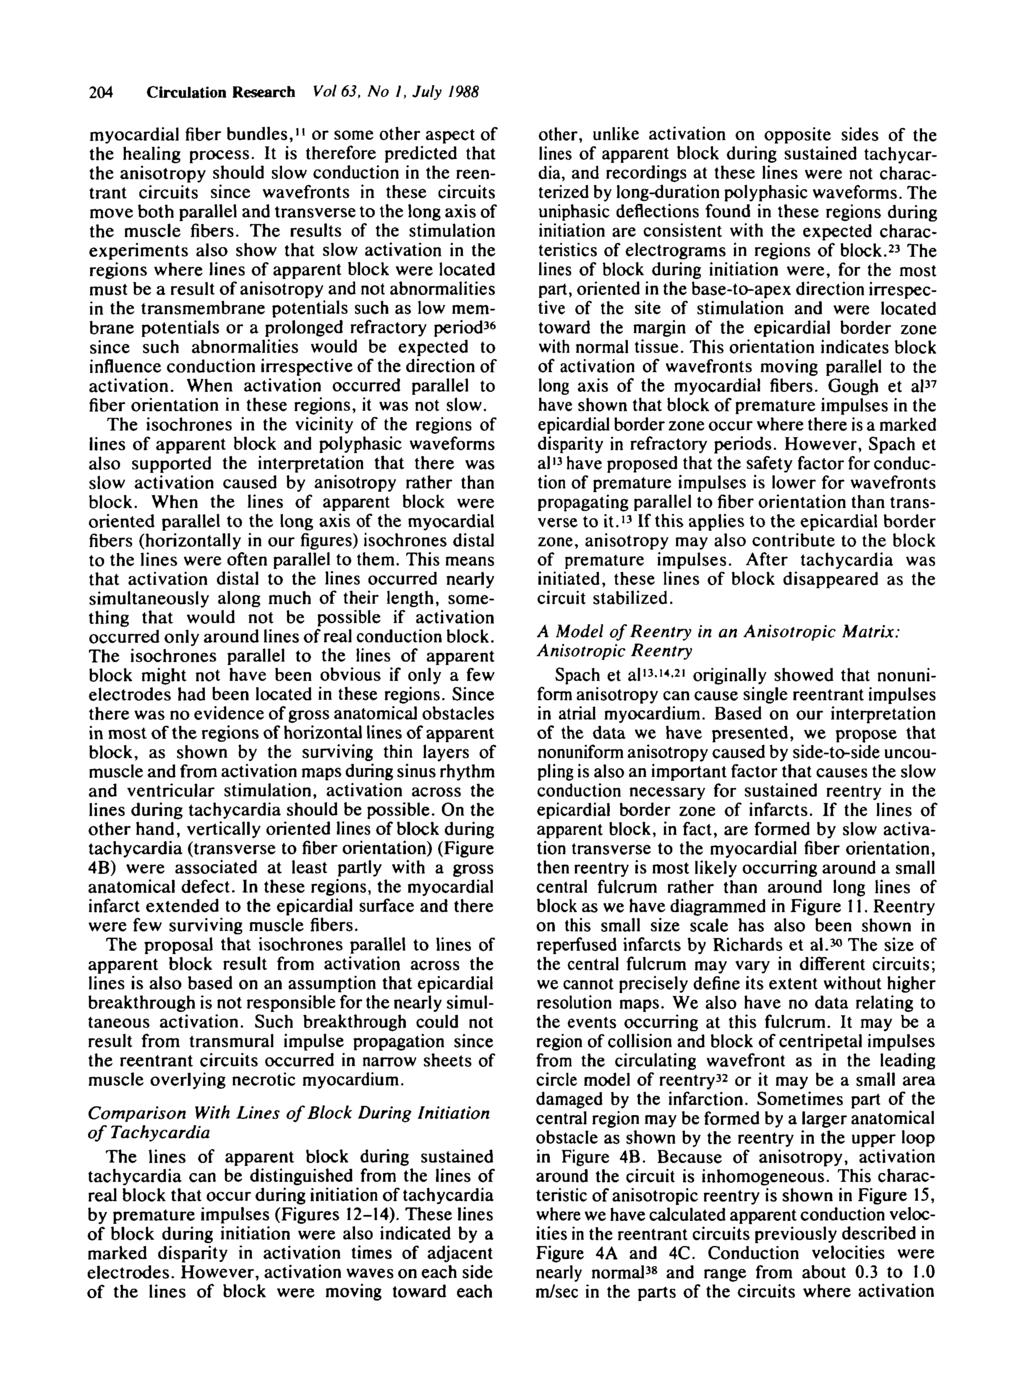 204 Circulation Research Vol 63, No I, July 1988 myocardial fiber bundles," or some other aspect of the healing process.